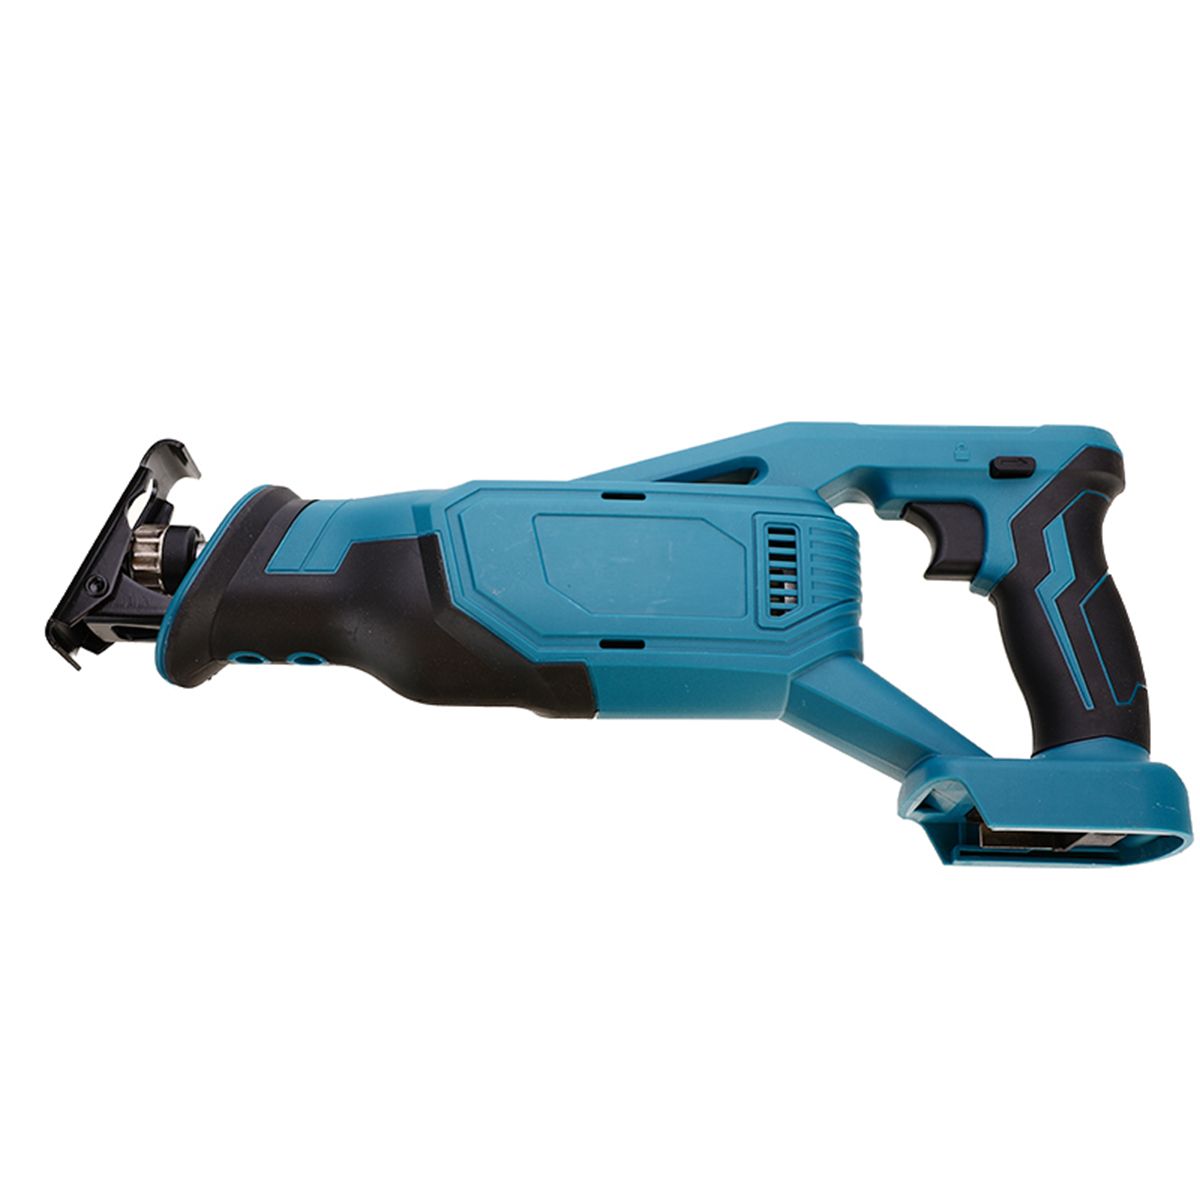 Electric-Cordless-Reciprocating-Saw-Electric-Saw-Woodworking-For-Makita-Battery-1680018